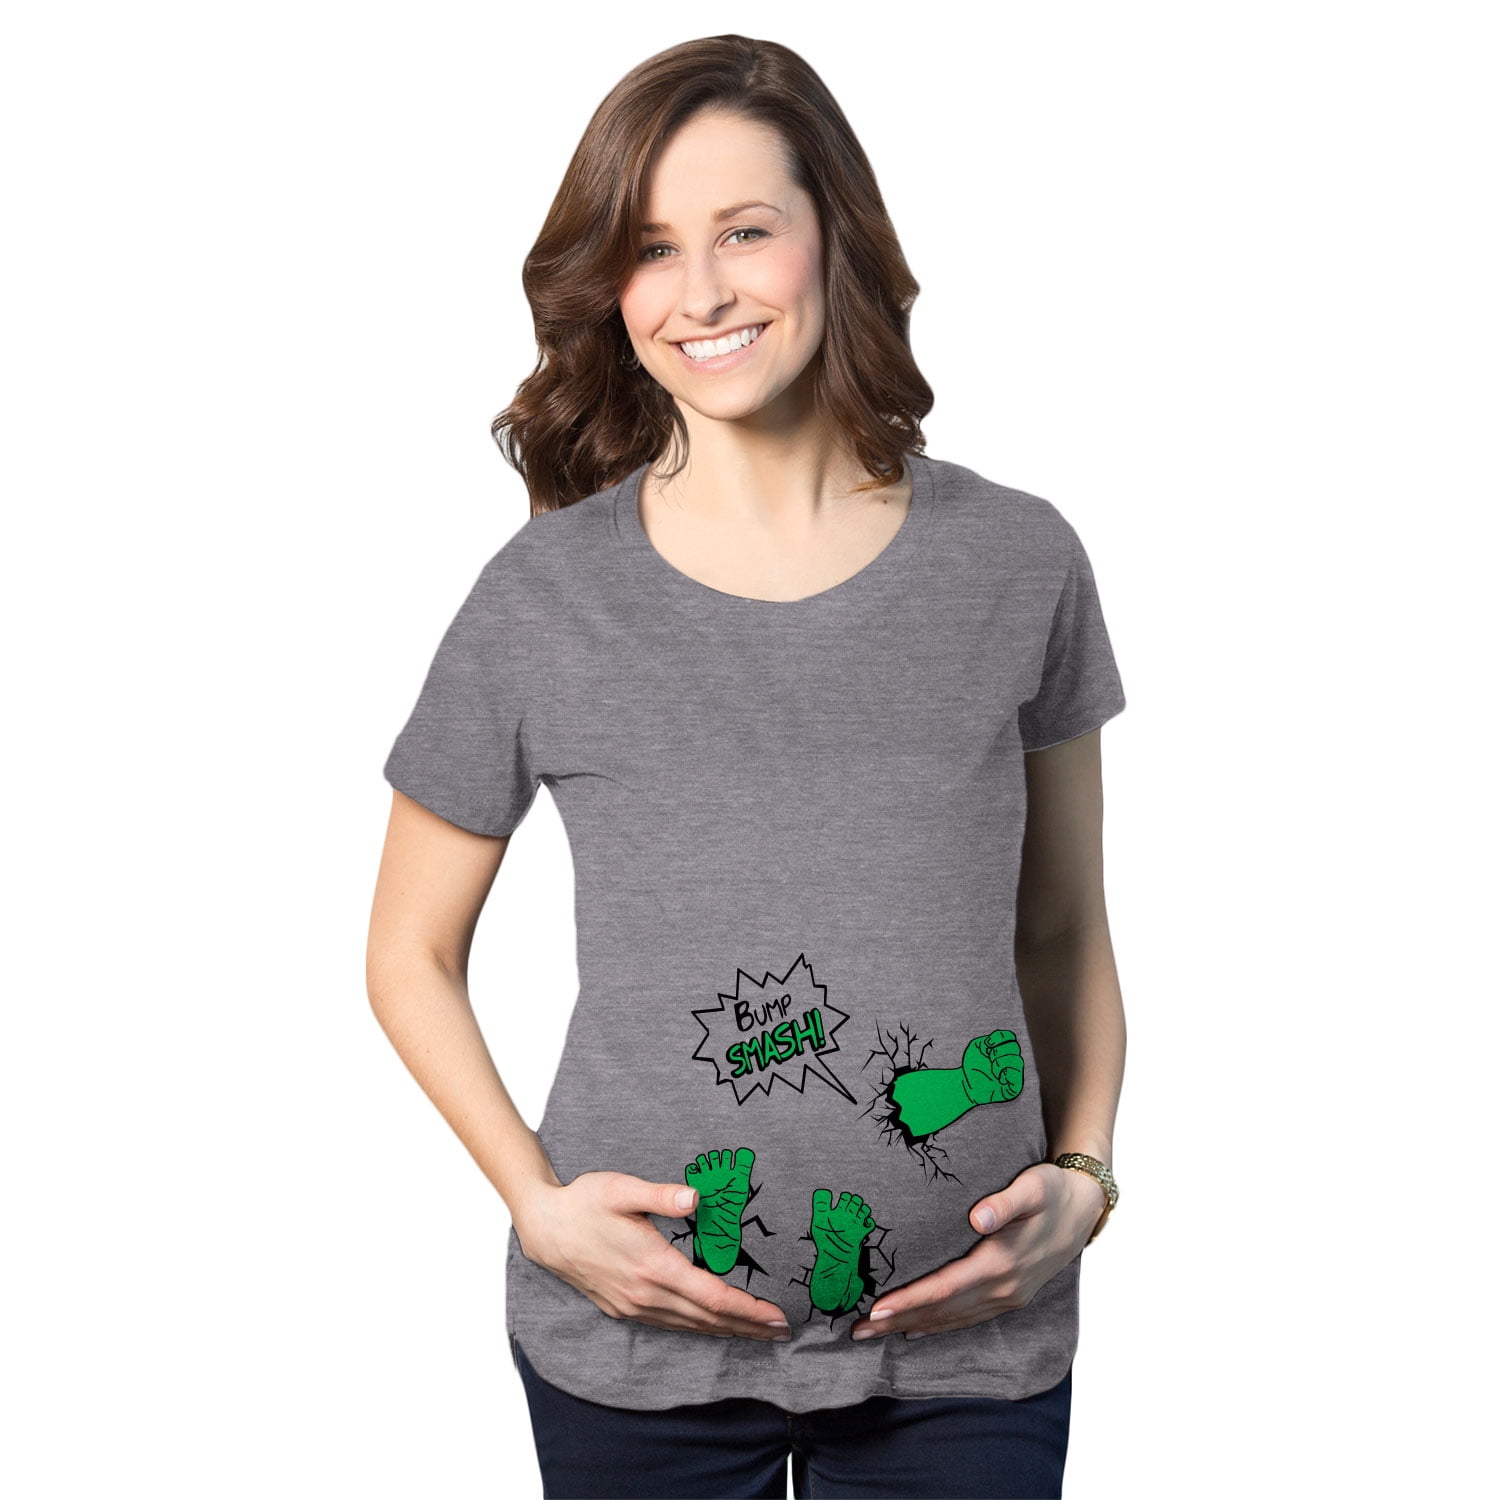 Maternity Bump Smash T shirt Funny New Baby Announcement Gender